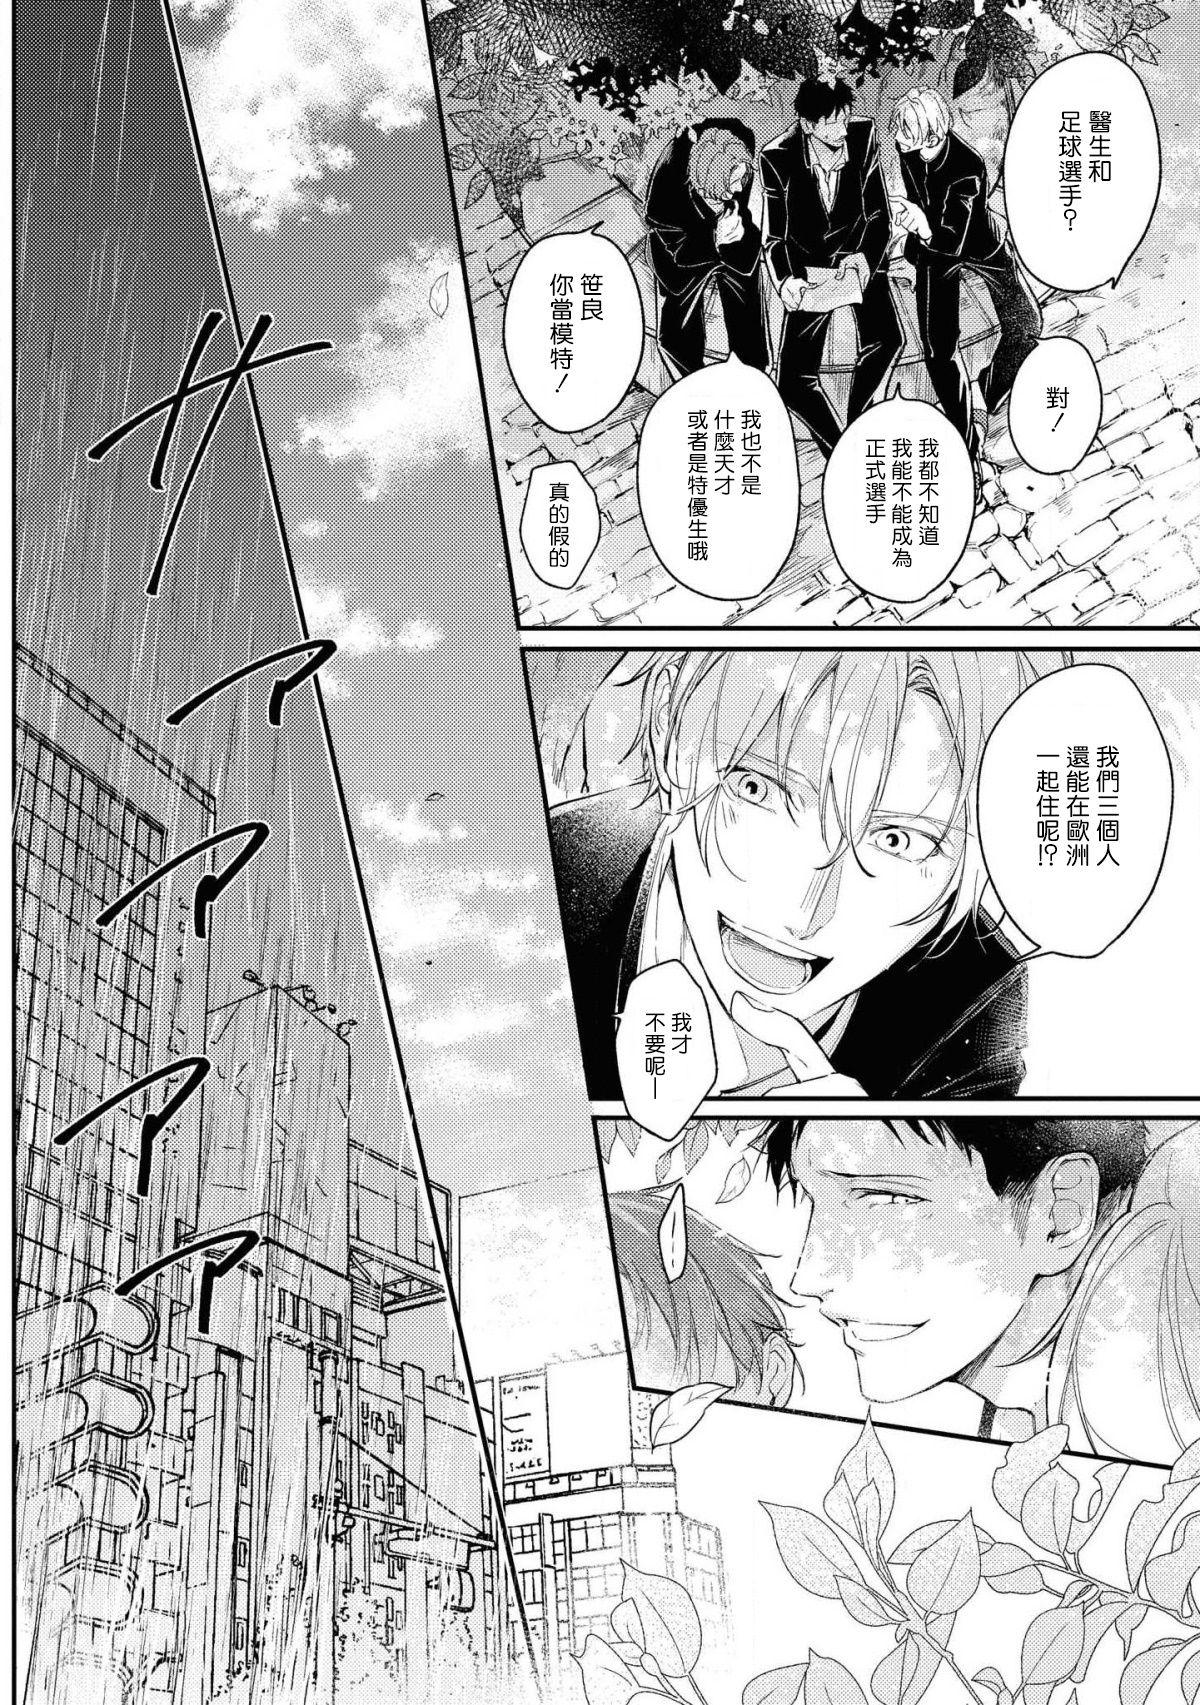 Amature Sex Light of my life Ch. 1 | 生命之光 01 Putaria - Page 6